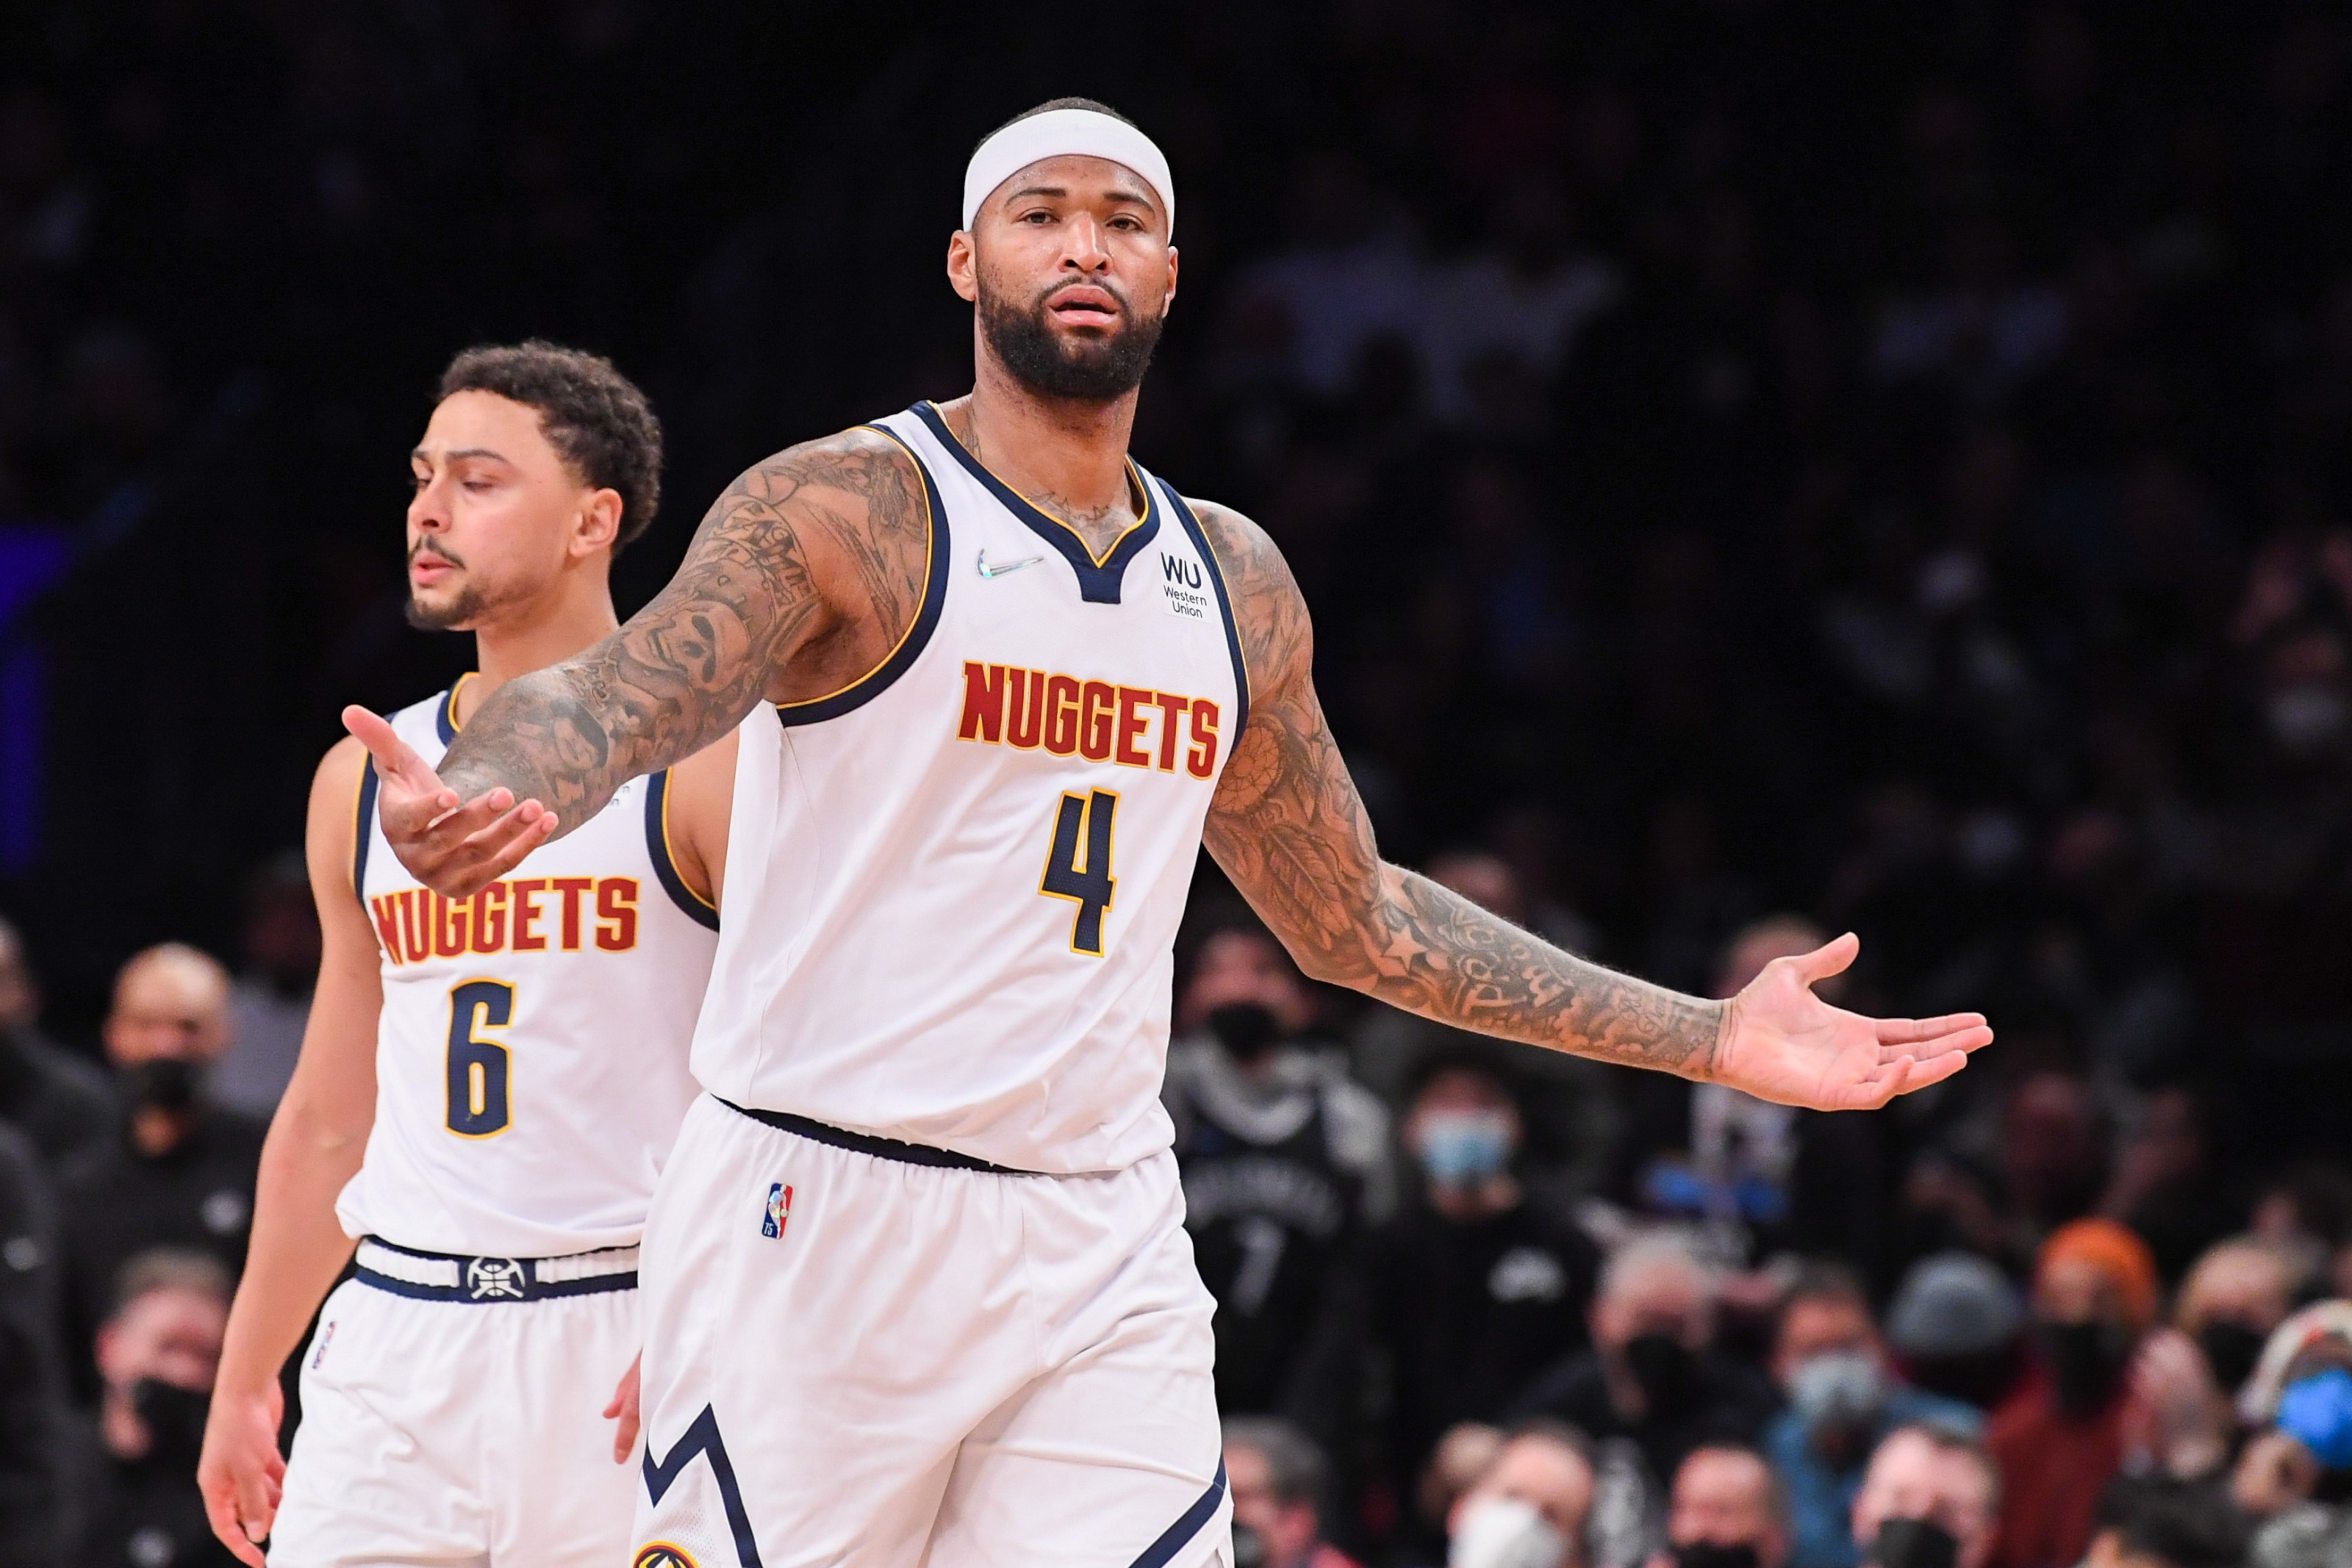 Grading the Week: DeMarcus Cousins, we're finally ready to forgive you –  The Denver Post